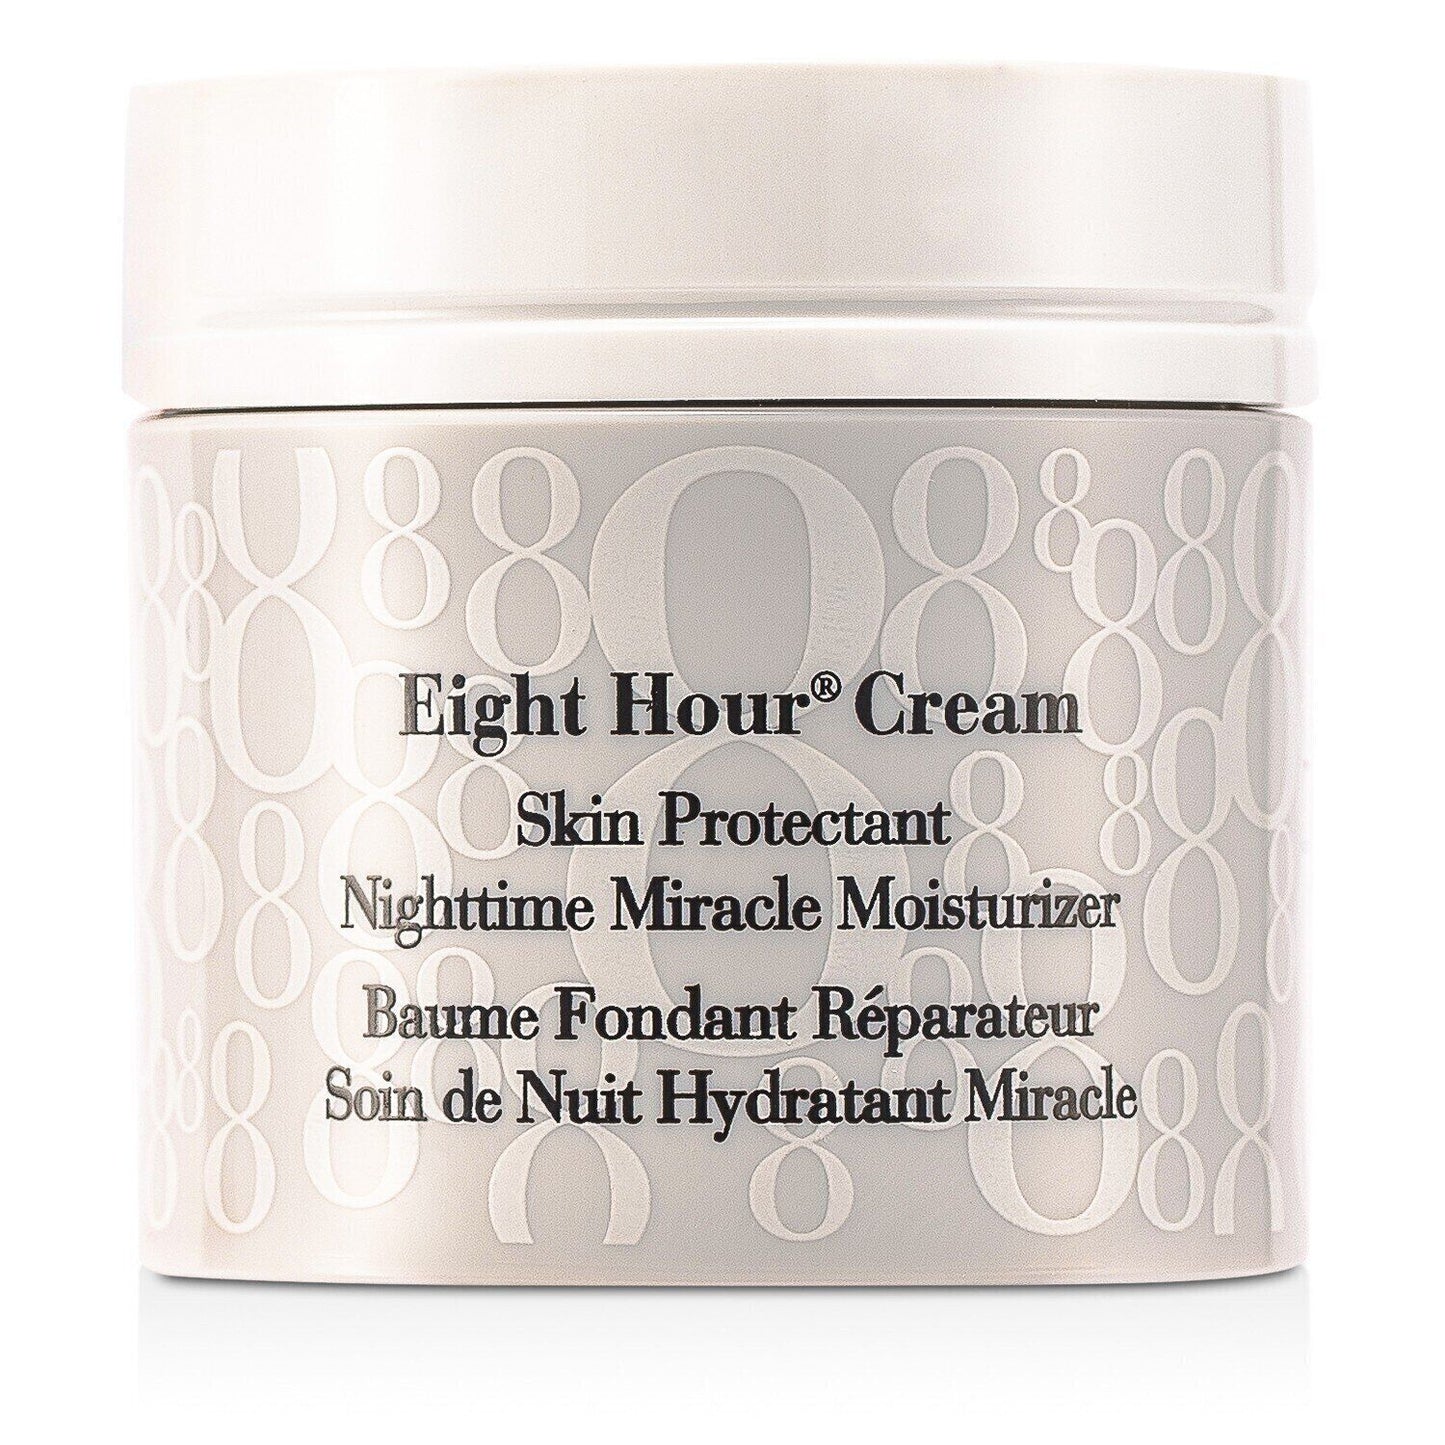 ELIZABETH ARDEN Eight Hour Cream Skin Protectant Night time Miracle 50ml Women's